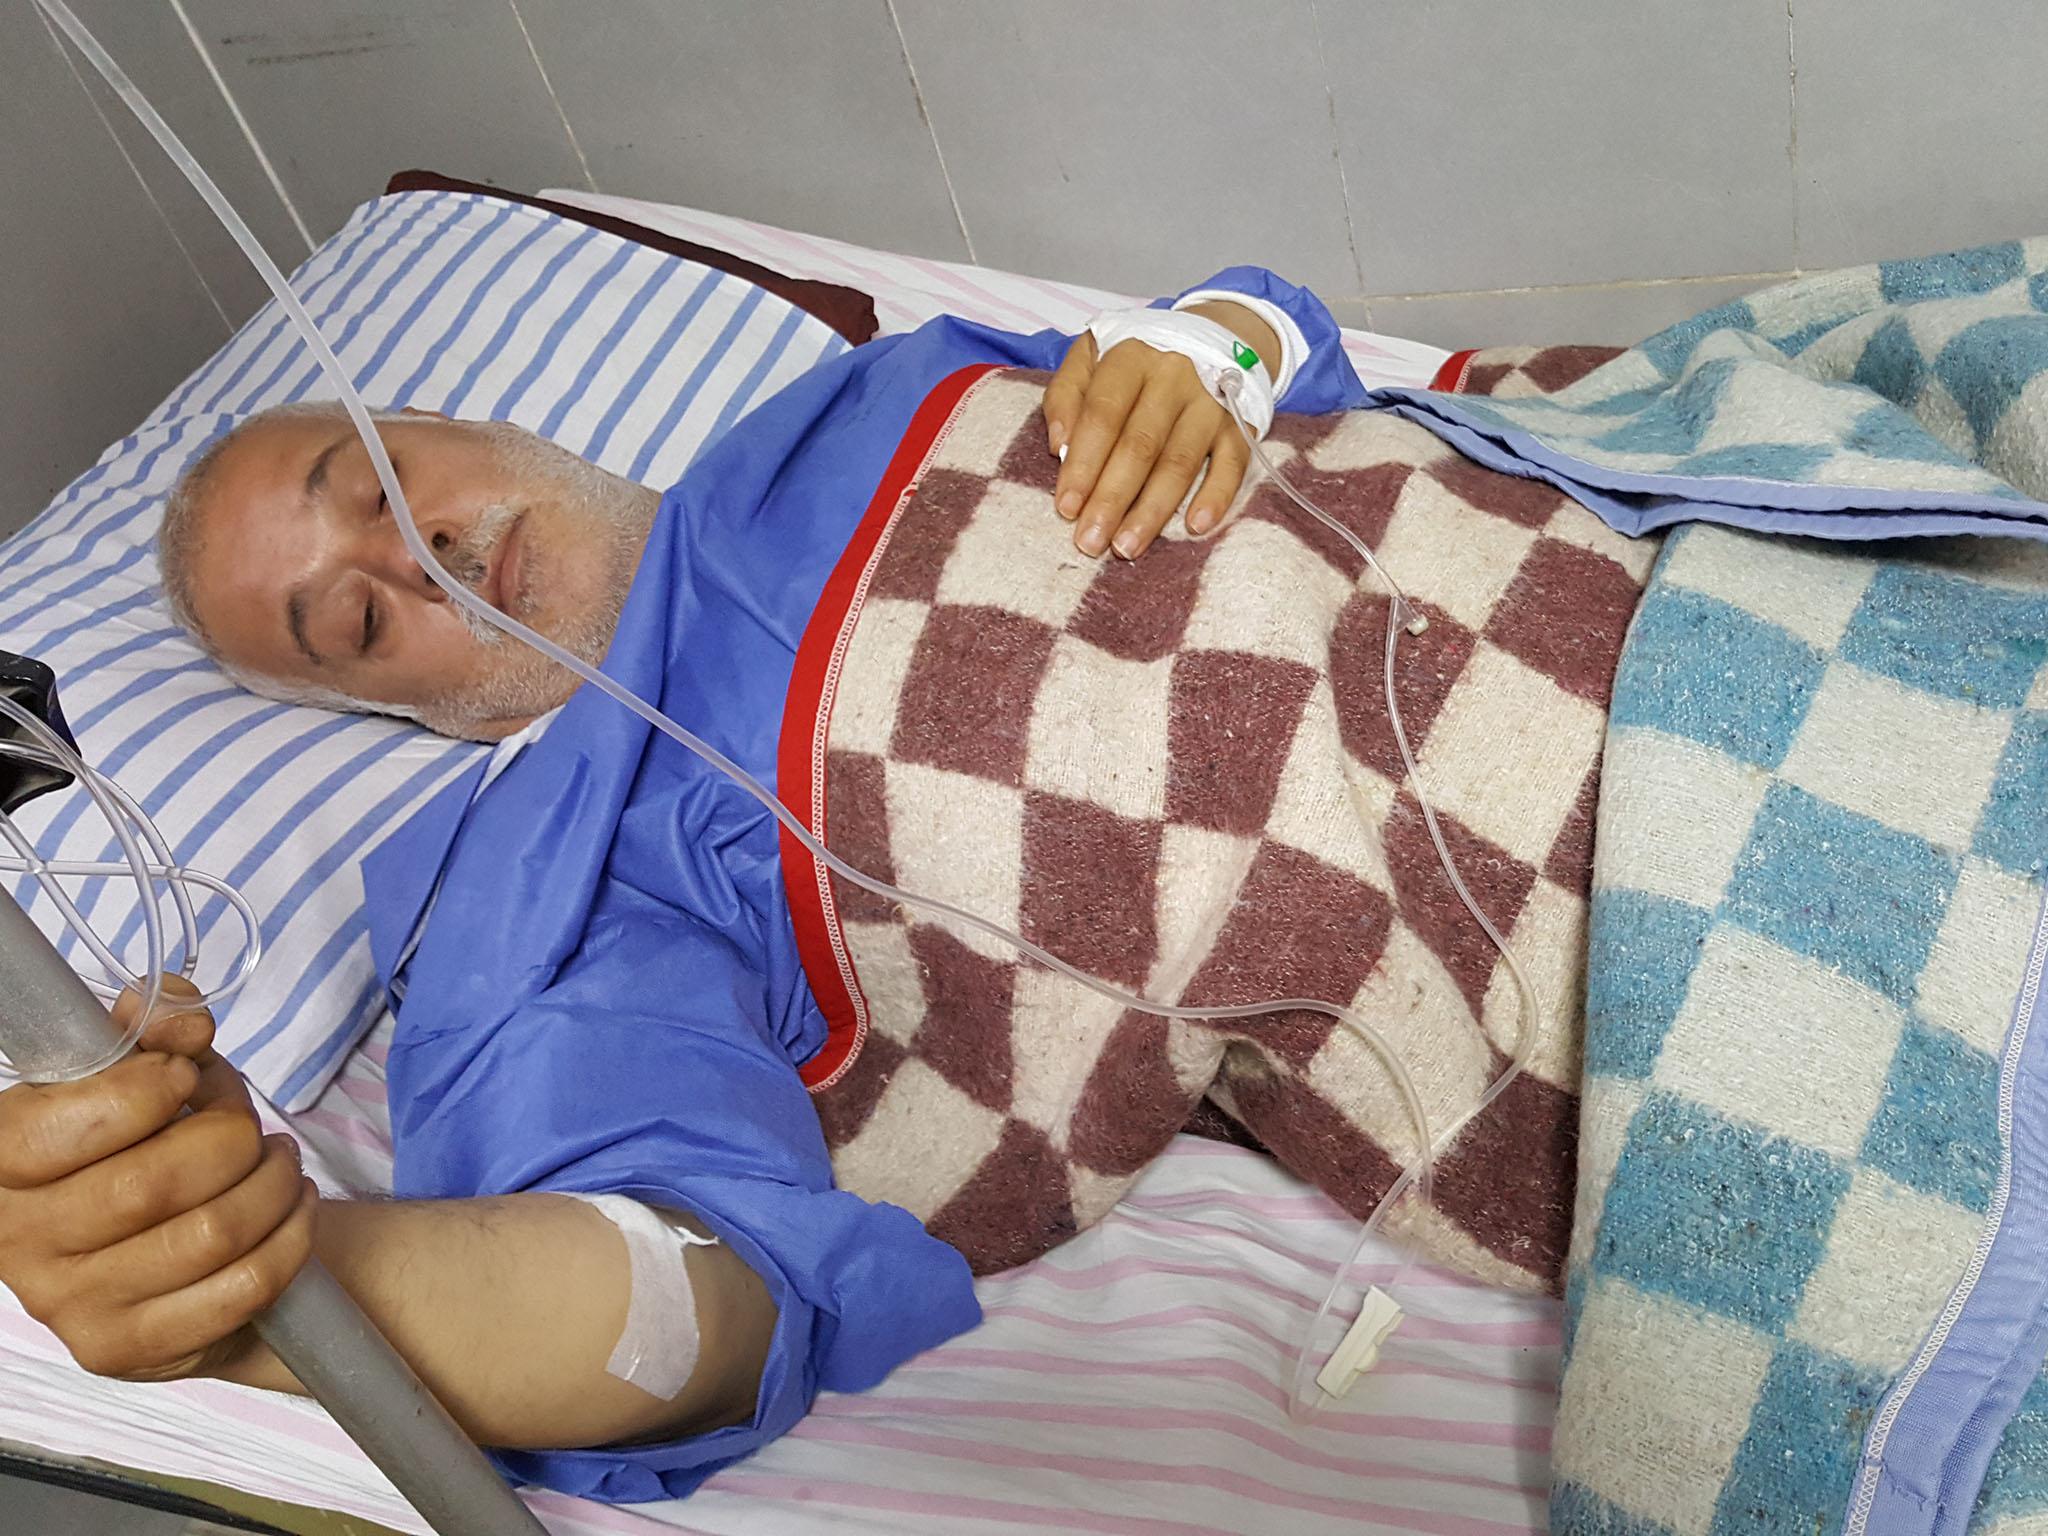 Ahmad Kindy, 50. was wounded at his home in Jundeires on the first night of the attack